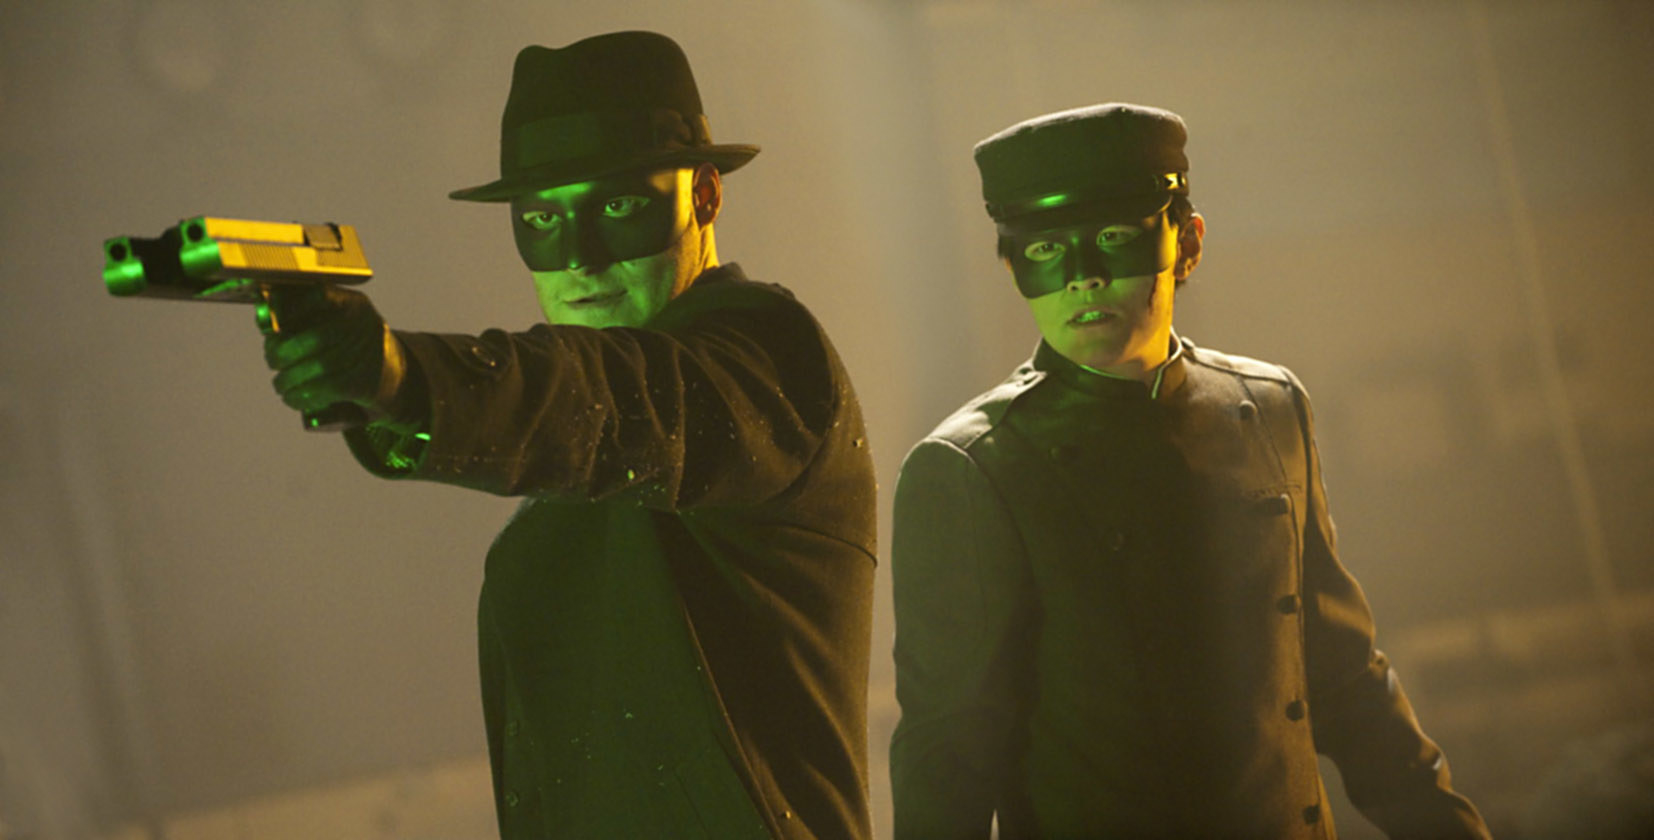 Seth Rogen and Jay Chou in “The Green Hornet”